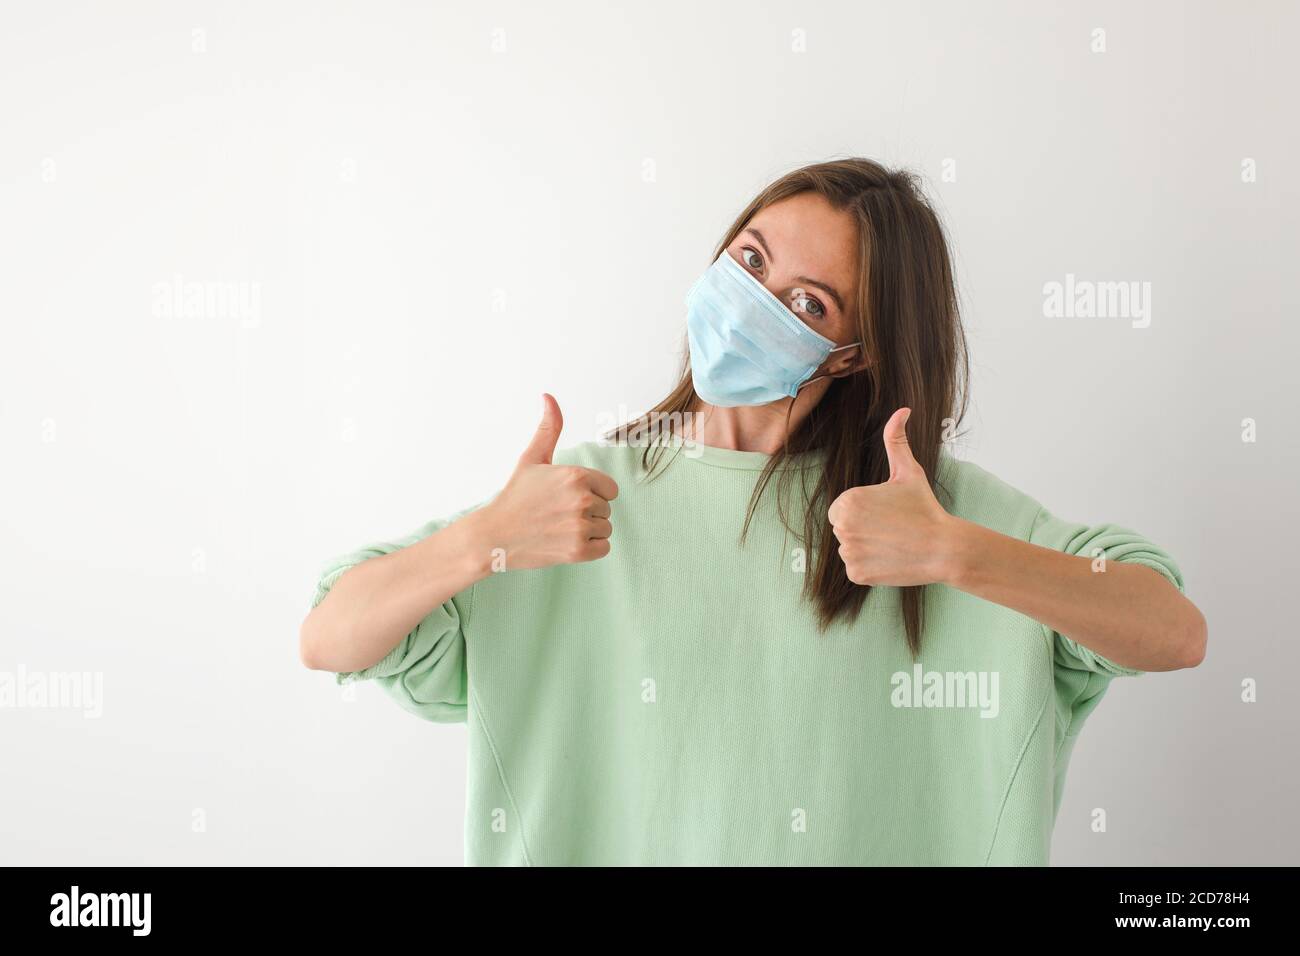 Caucasian young woman with disposable face mask Stock Photo